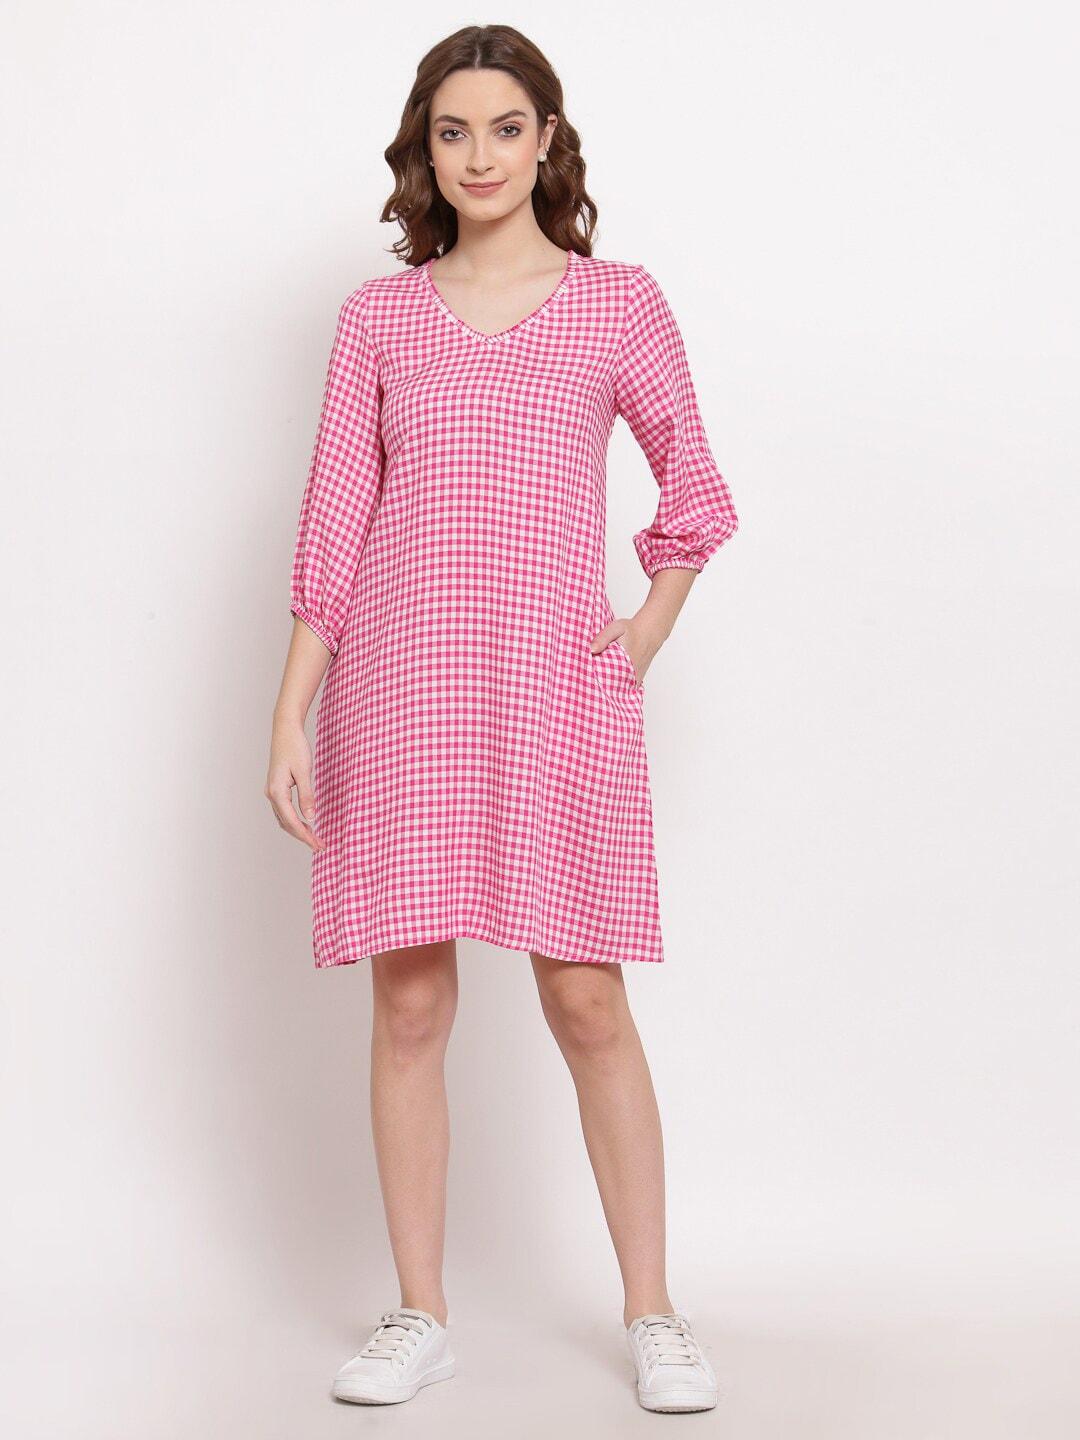 TERQUOIS Pink Checked A-Line Dress